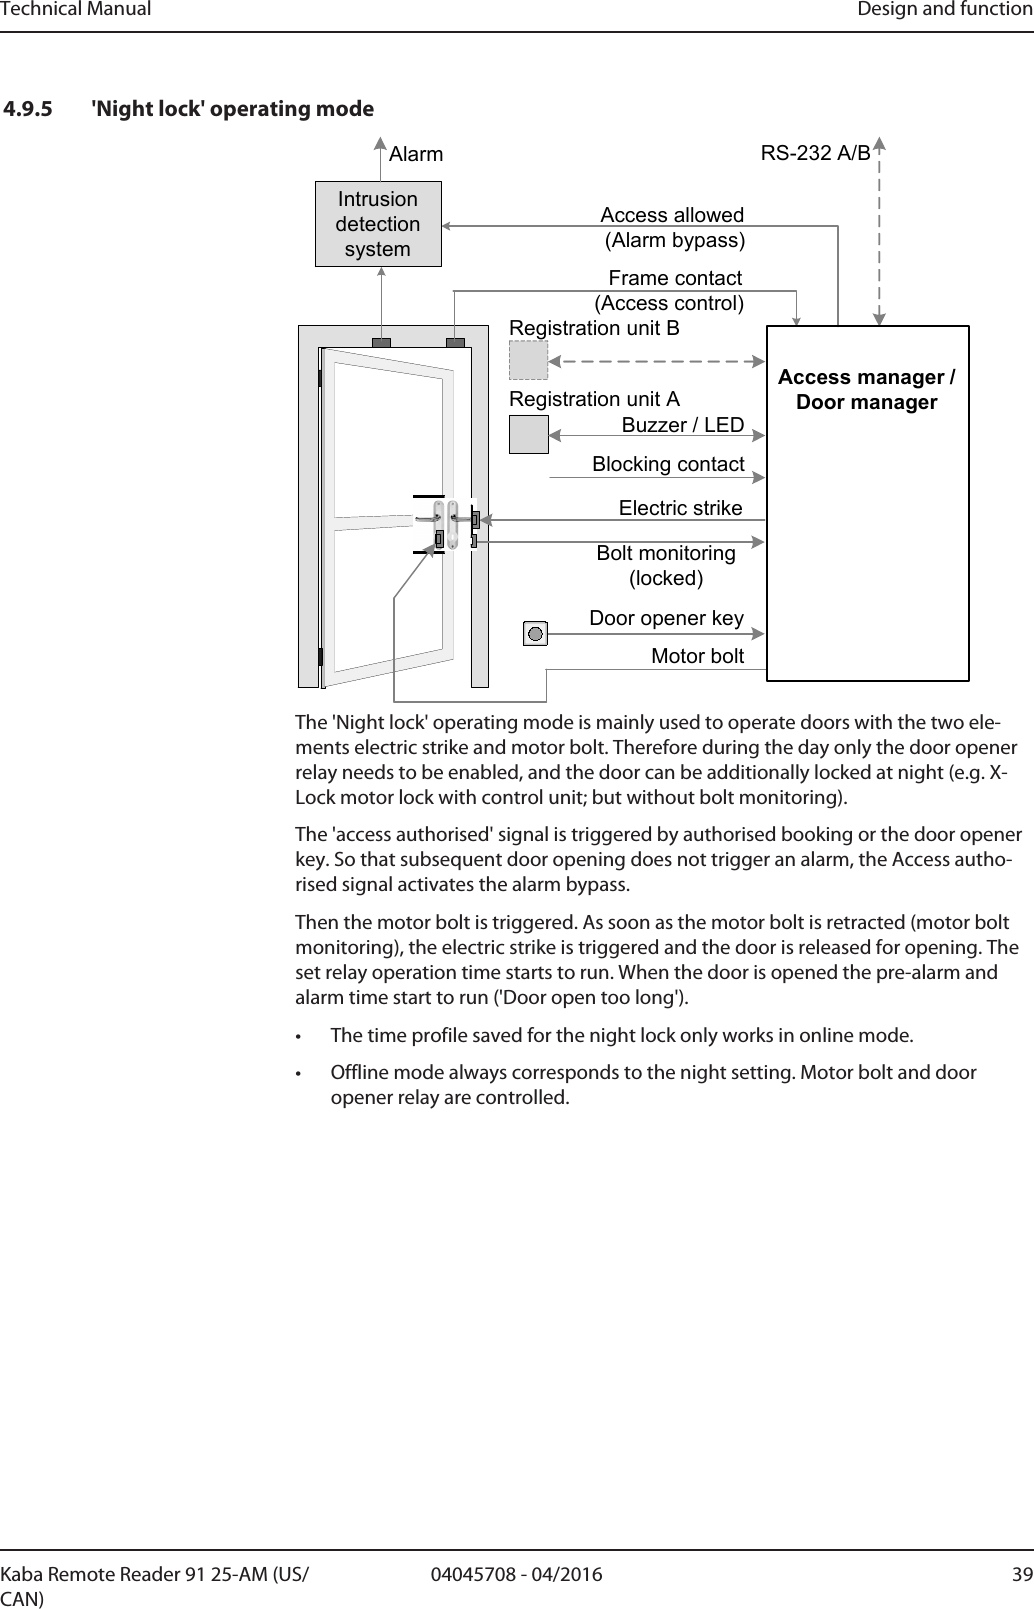 Technical Manual Design and function3904045708 - 04/2016Kaba Remote Reader 91 25-AM (US/CAN)4.9.5 &apos;Night lock&apos; operating modeRS-232 A/BBuzzer / LEDMotor boltAccess allowedFrame contact(Alarm bypass)(Access control)Registration unit ABlocking contactRegistration unit BDoor opener keyIntrusion detection systemAlarmBolt monitoring (locked)Electric strikeAccess manager /Door managerThe &apos;Night lock&apos; operating mode is mainly used to operate doors with the two ele-ments electric strike and motor bolt. Therefore during the day only the door openerrelay needs to be enabled, and the door can be additionally locked at night (e.g. X-Lock motor lock with control unit; but without bolt monitoring).The &apos;access authorised&apos; signal is triggered by authorised booking or the door openerkey. So that subsequent door opening does not trigger an alarm, the Access autho-rised signal activates the alarm bypass.Then the motor bolt is triggered. As soon as the motor bolt is retracted (motor boltmonitoring), the electric strike is triggered and the door is released for opening. Theset relay operation time starts to run. When the door is opened the pre-alarm andalarm time start to run (&apos;Door open too long&apos;).• The time profile saved for the night lock only works in online mode.• Offline mode always corresponds to the night setting. Motor bolt and dooropener relay are controlled.